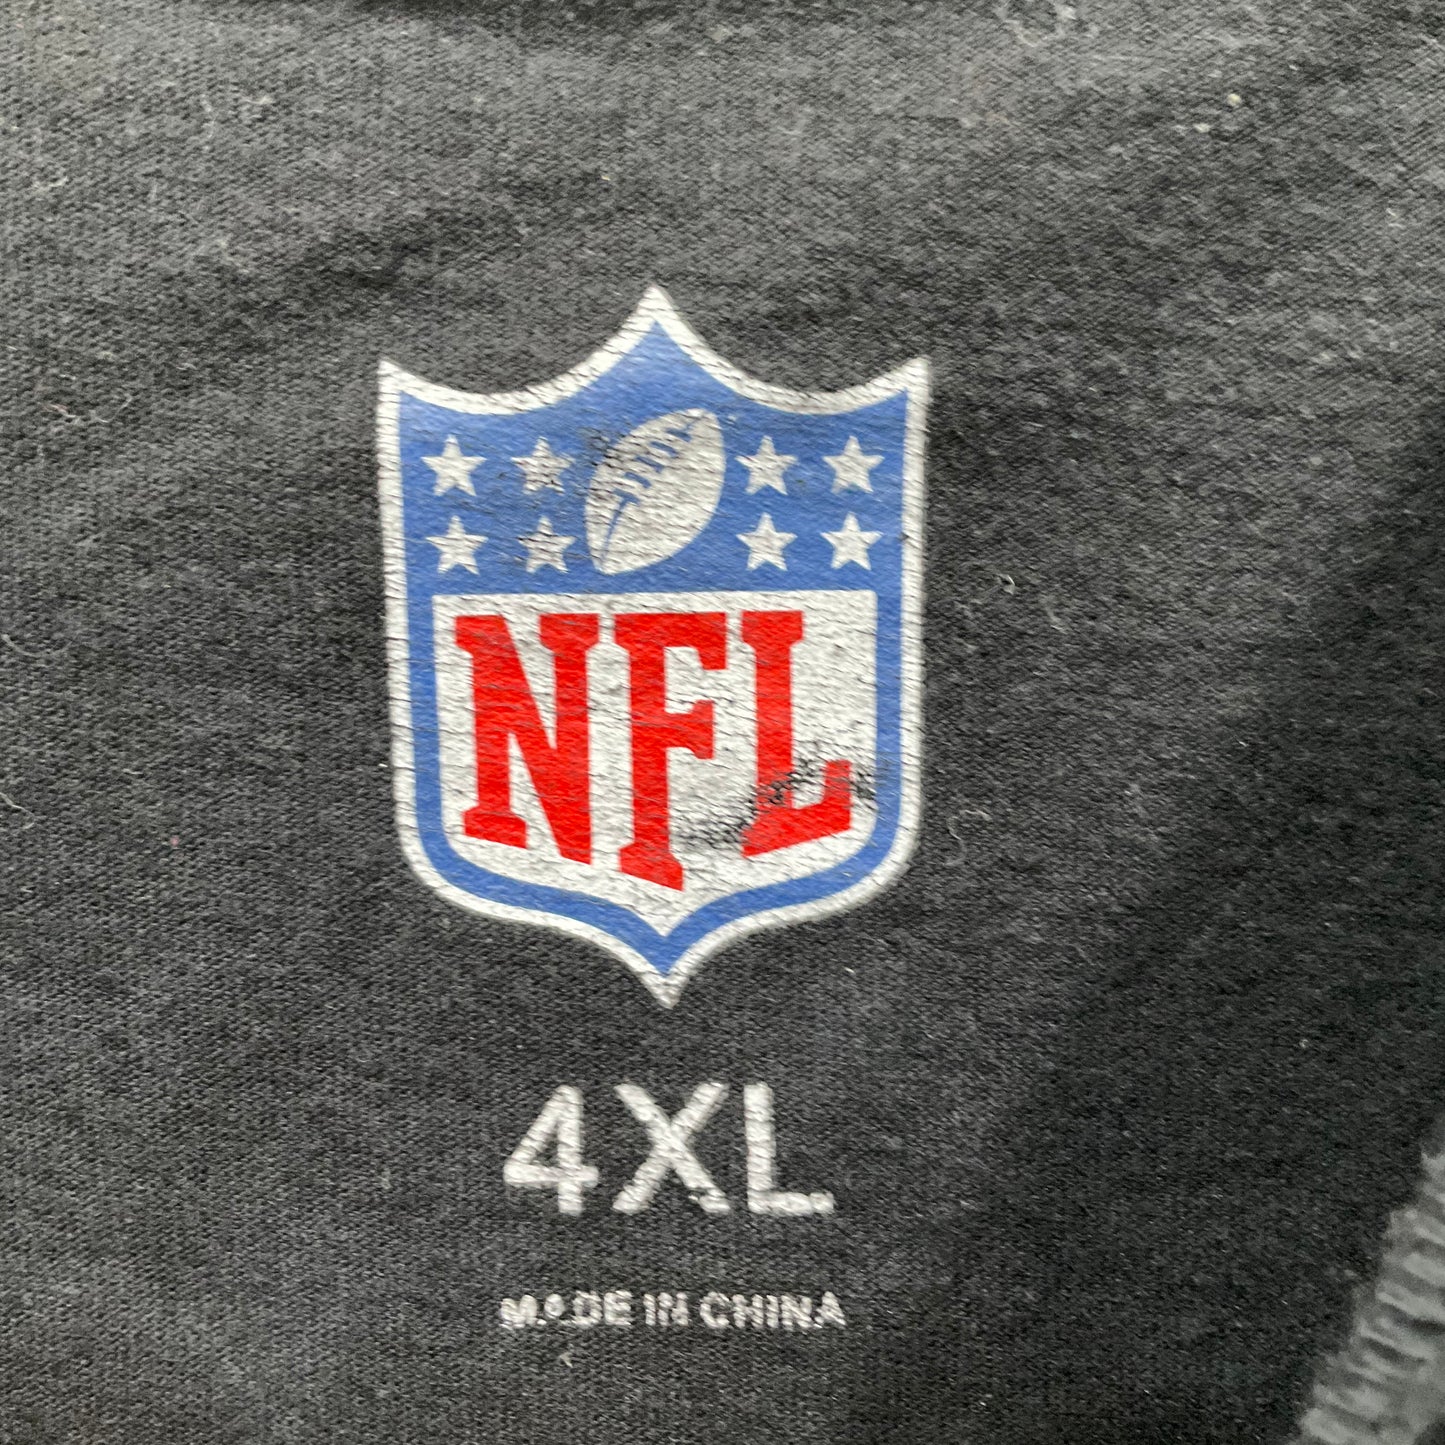 Top Short Sleeve By Nfl  Size: 4x